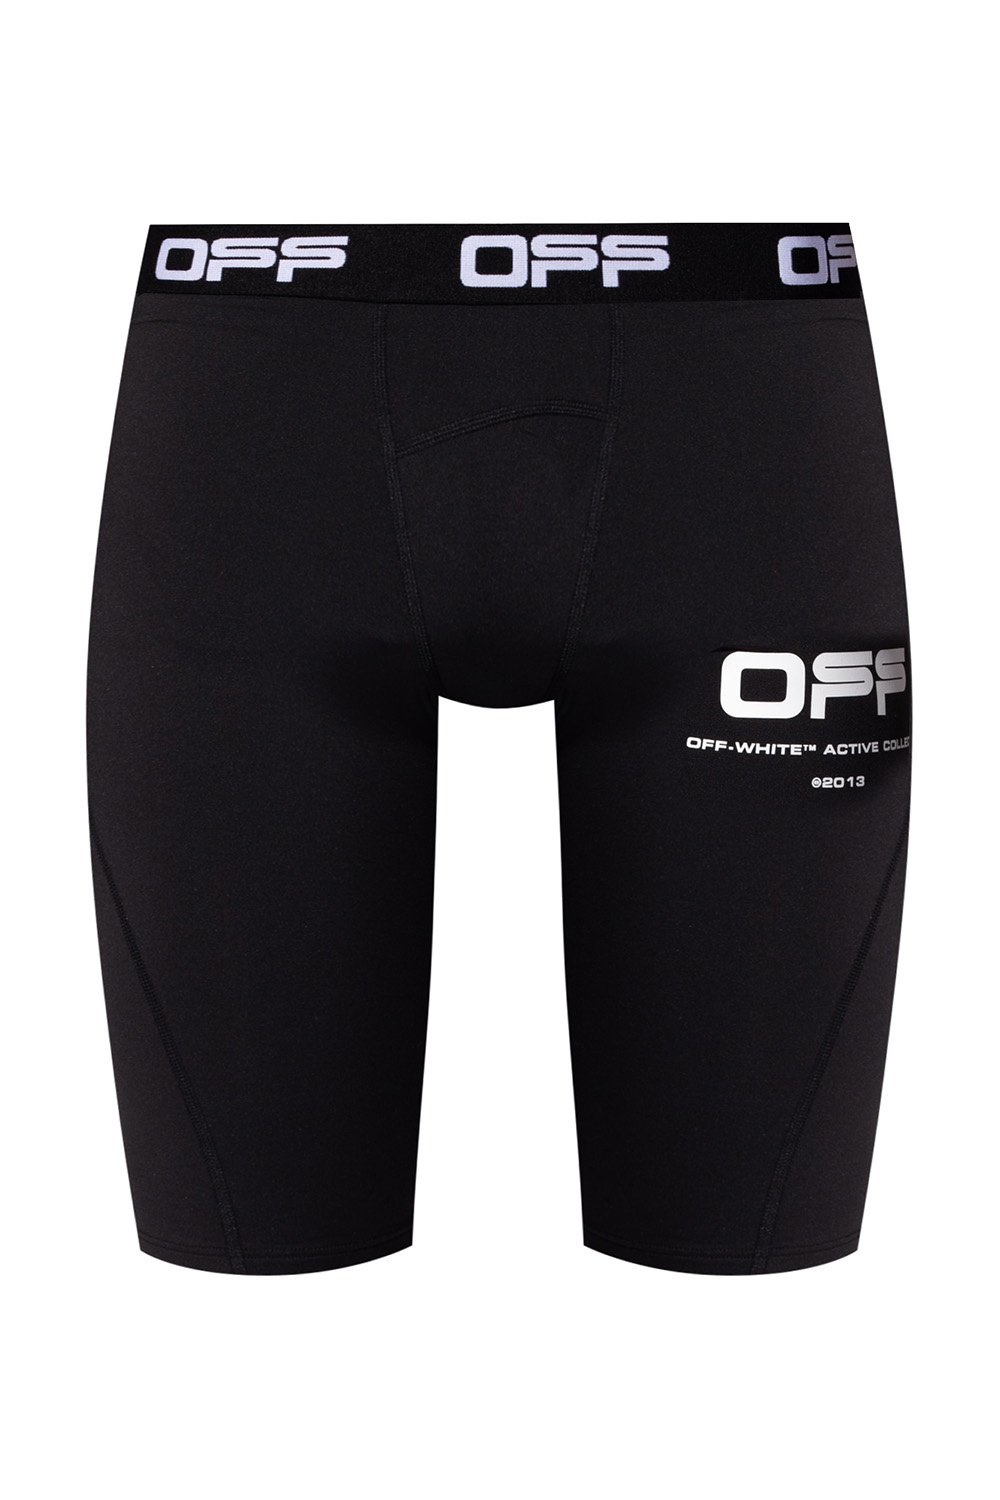 Off-White Russell Athletic Script Mens Shorts